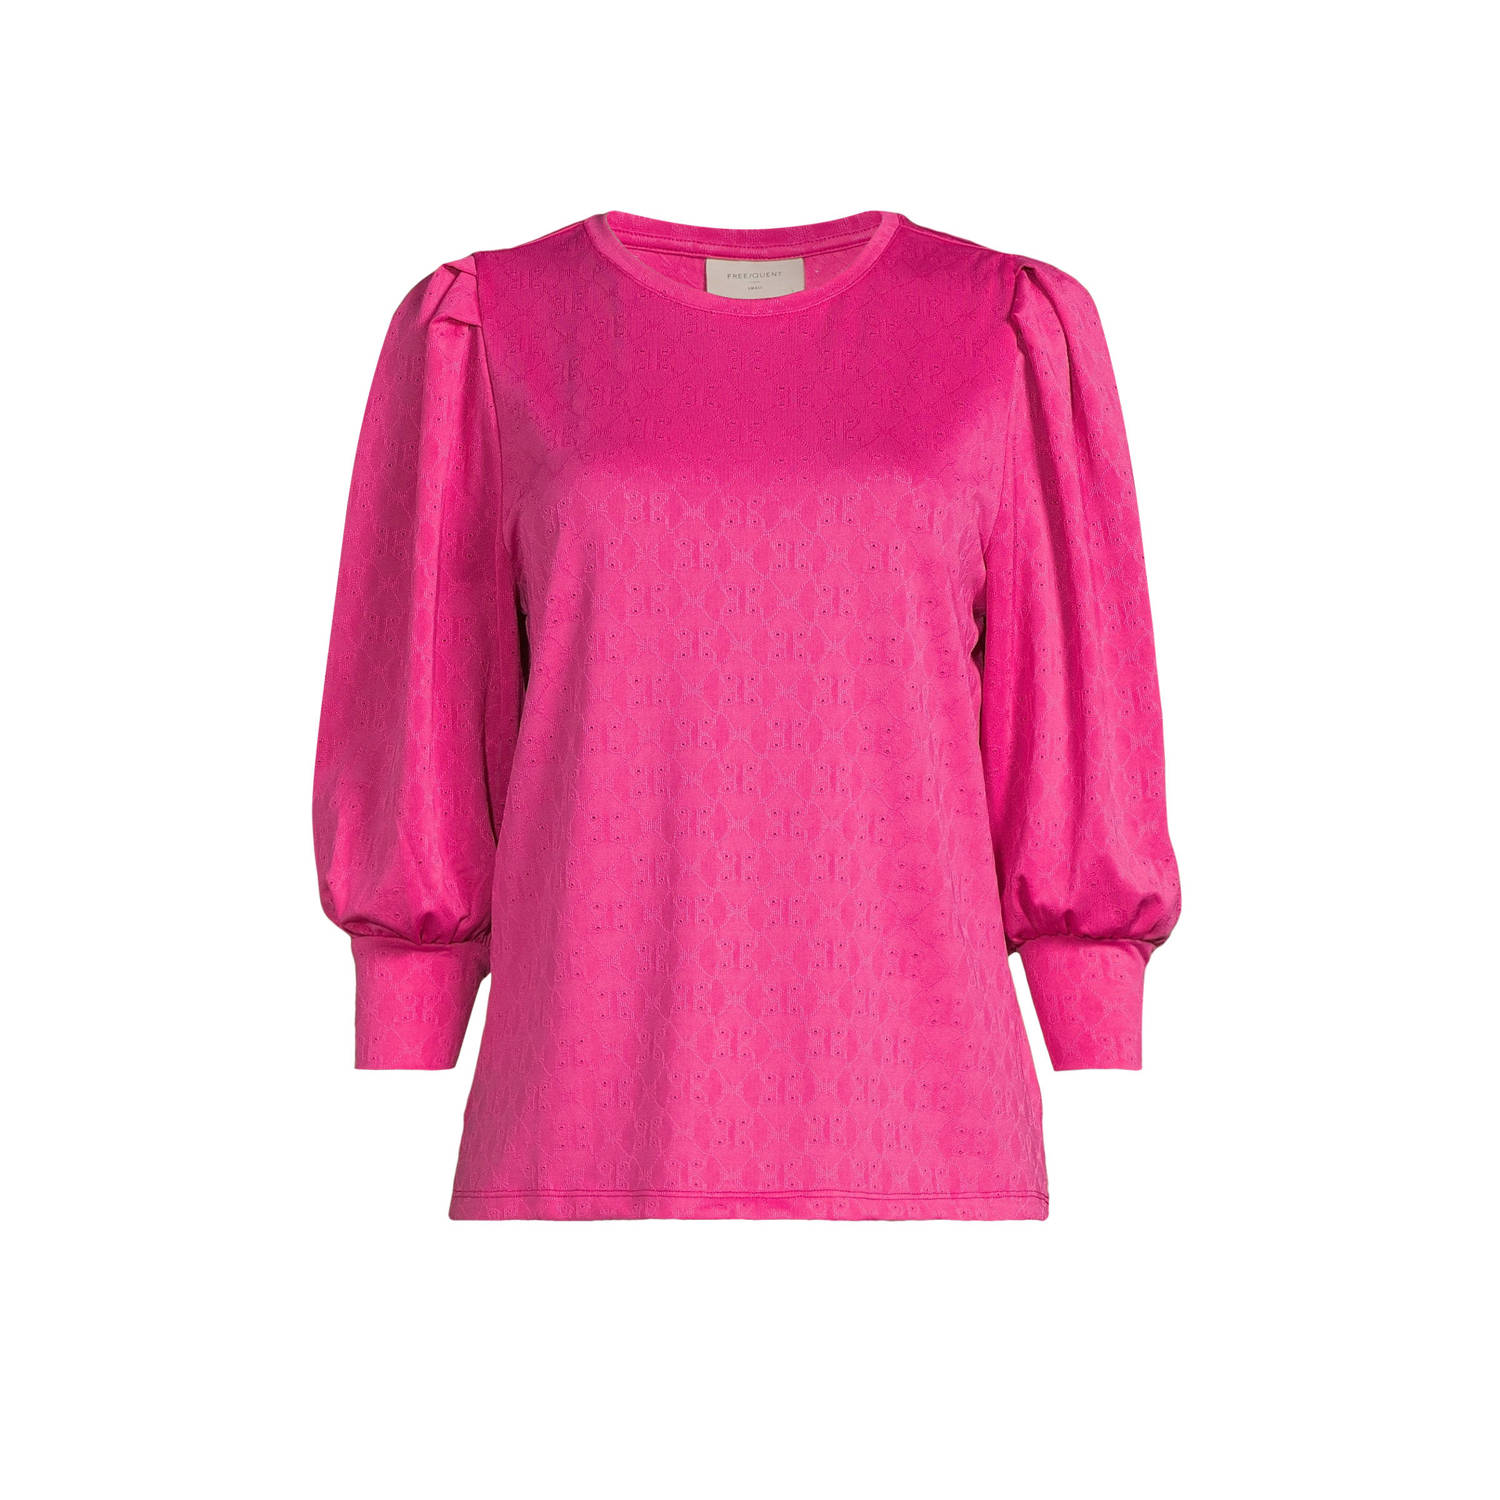 FREEQUENT top roze